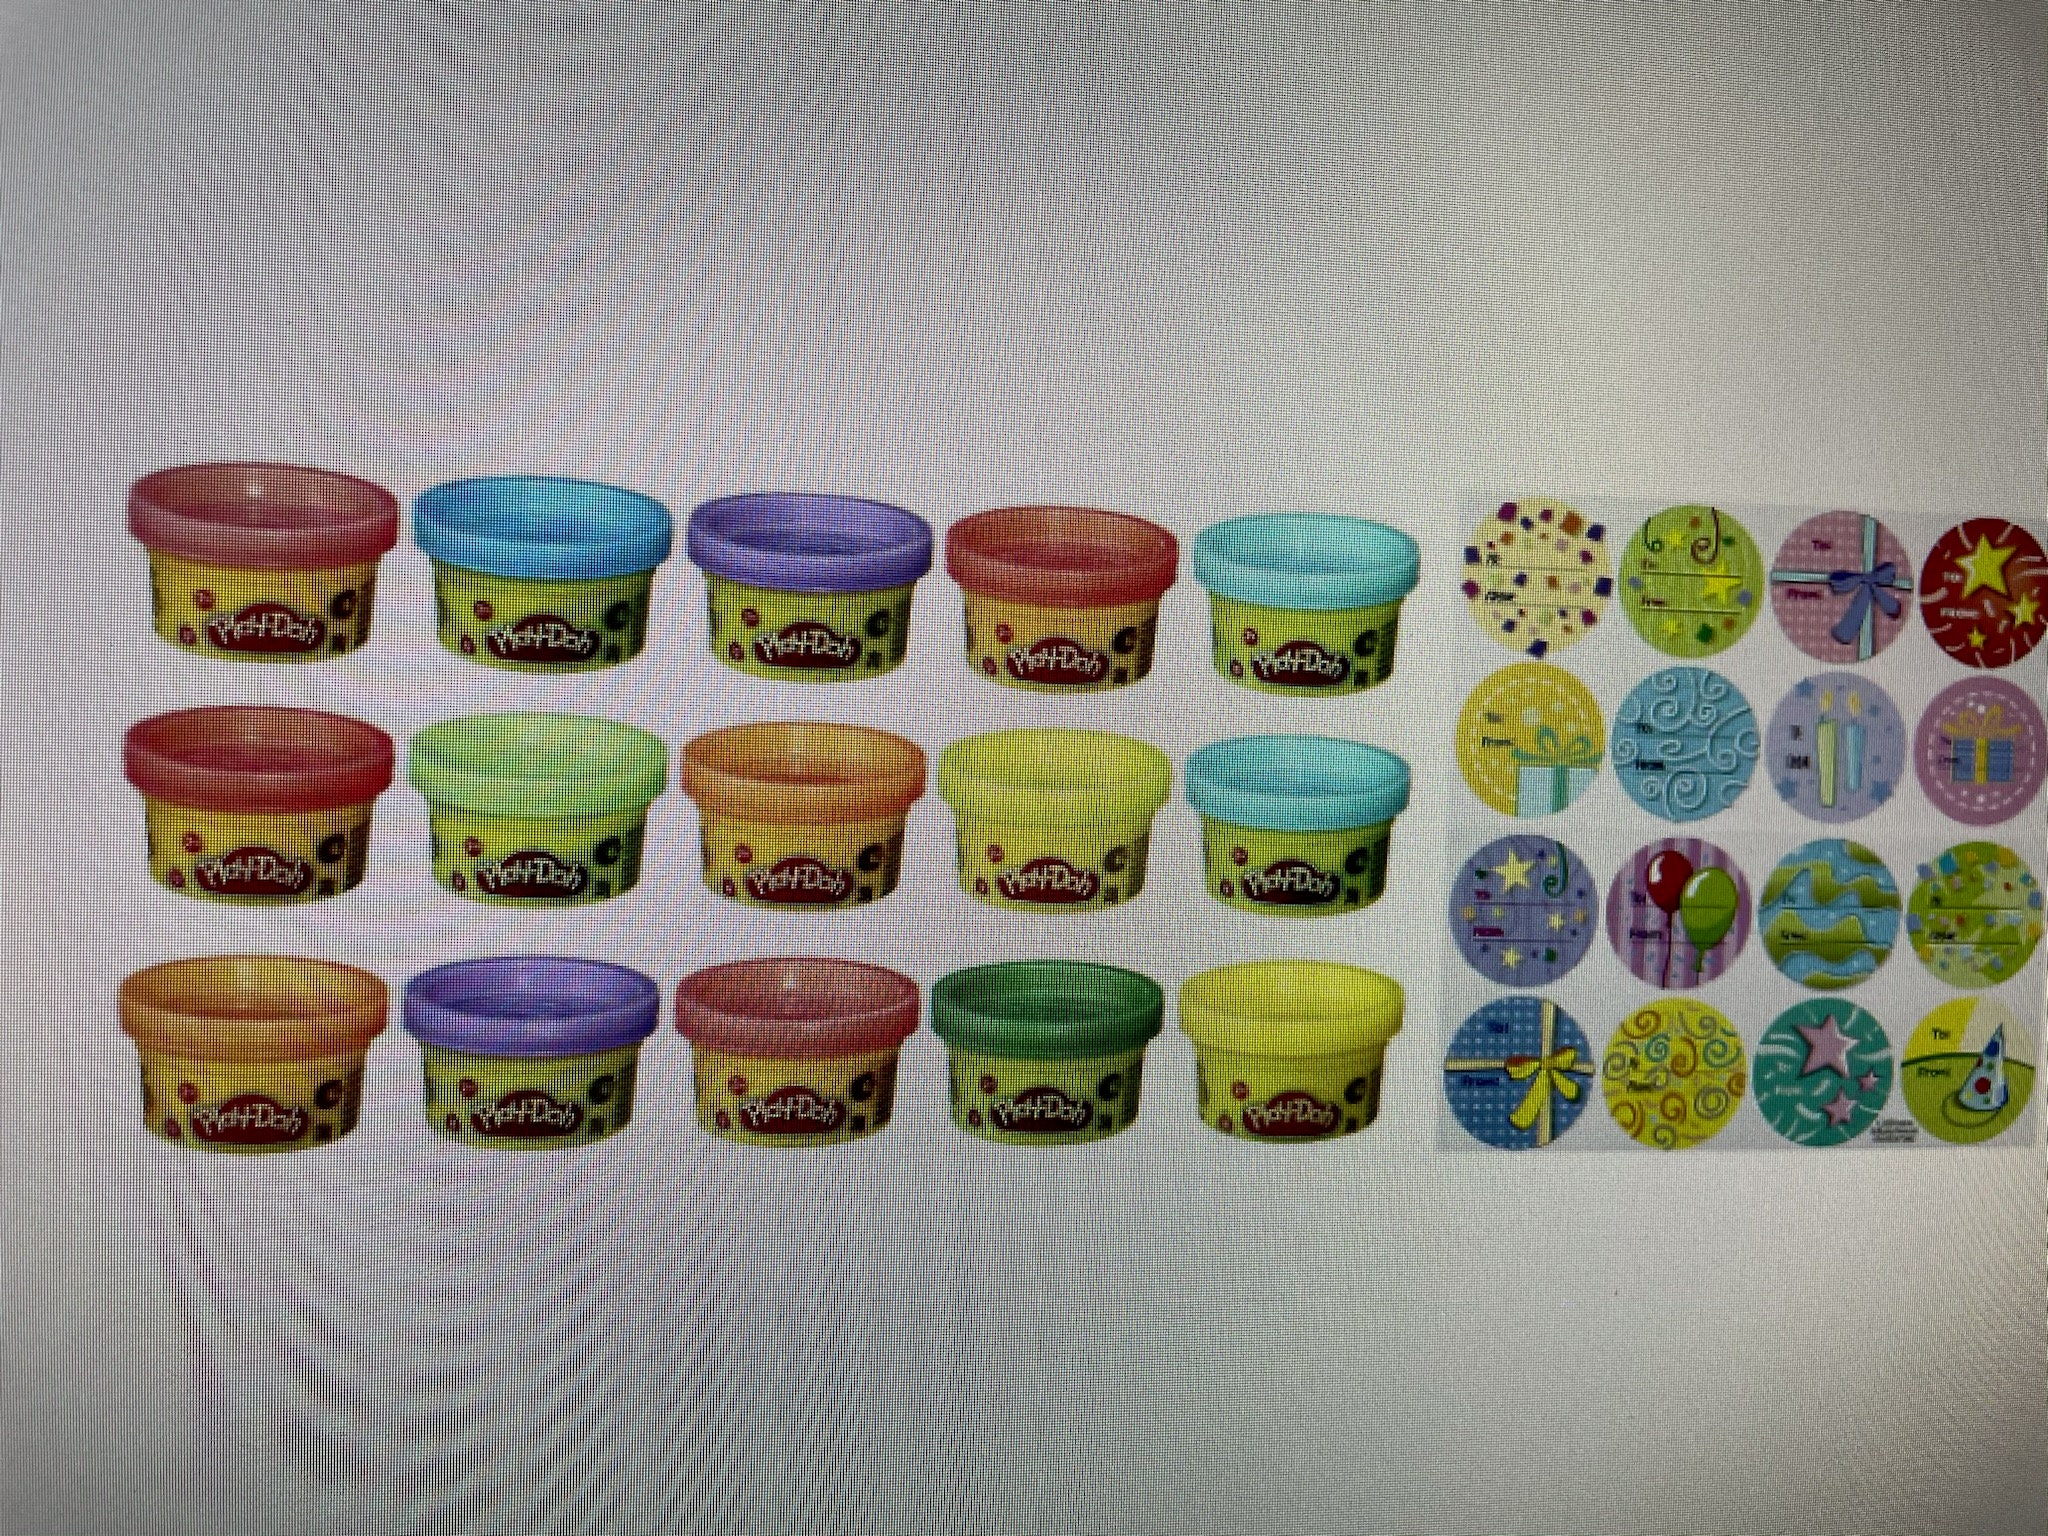 Play-Doh Party Pack (15 cans)